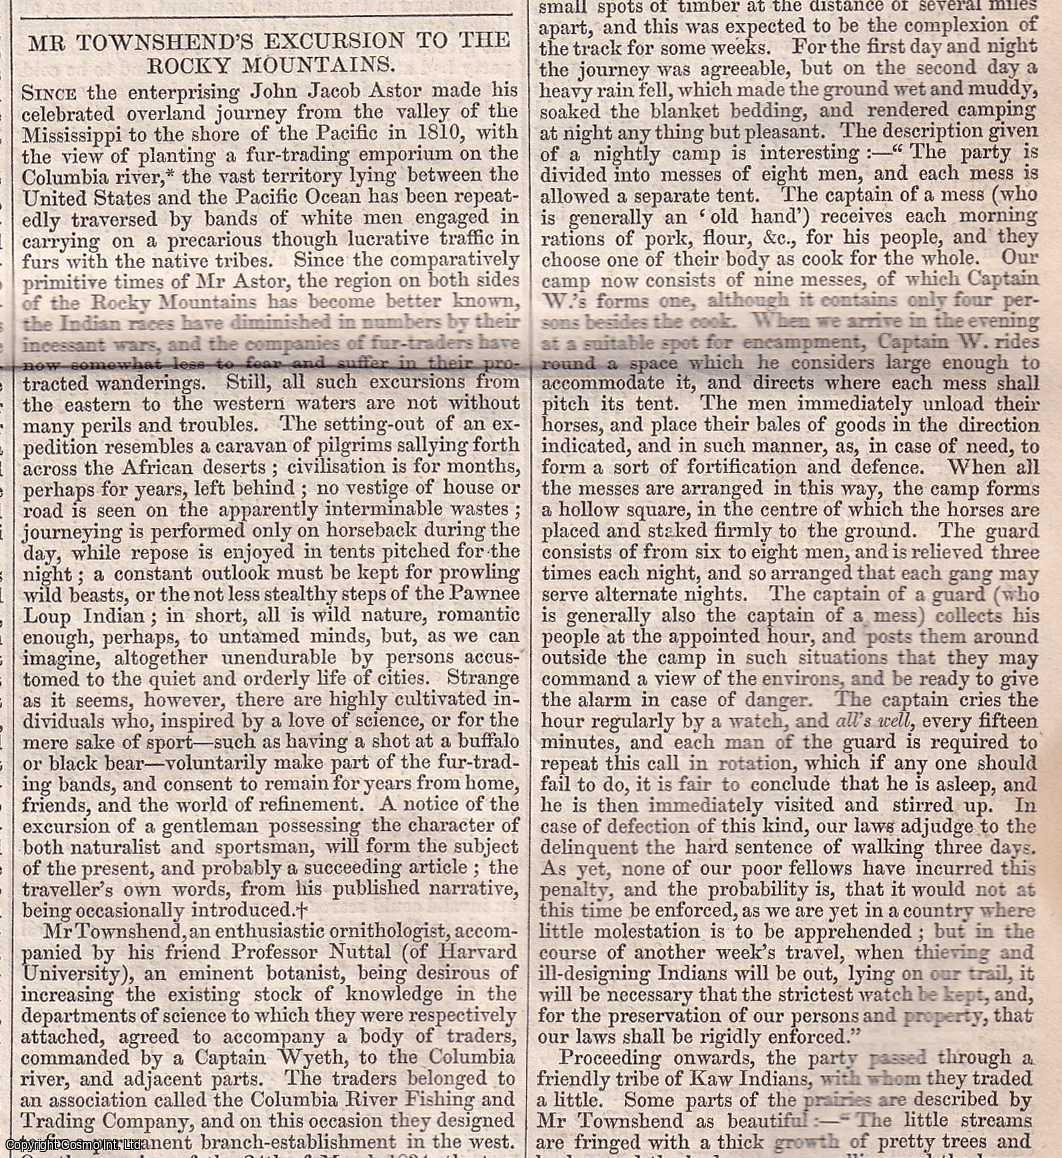 Chambers' Edinburgh Journal - Mr. Townshend's Excursion to the Rocky Mountains. An excerpt taken from his recent publication, describing the wild life, a meeting with Indians, etc.